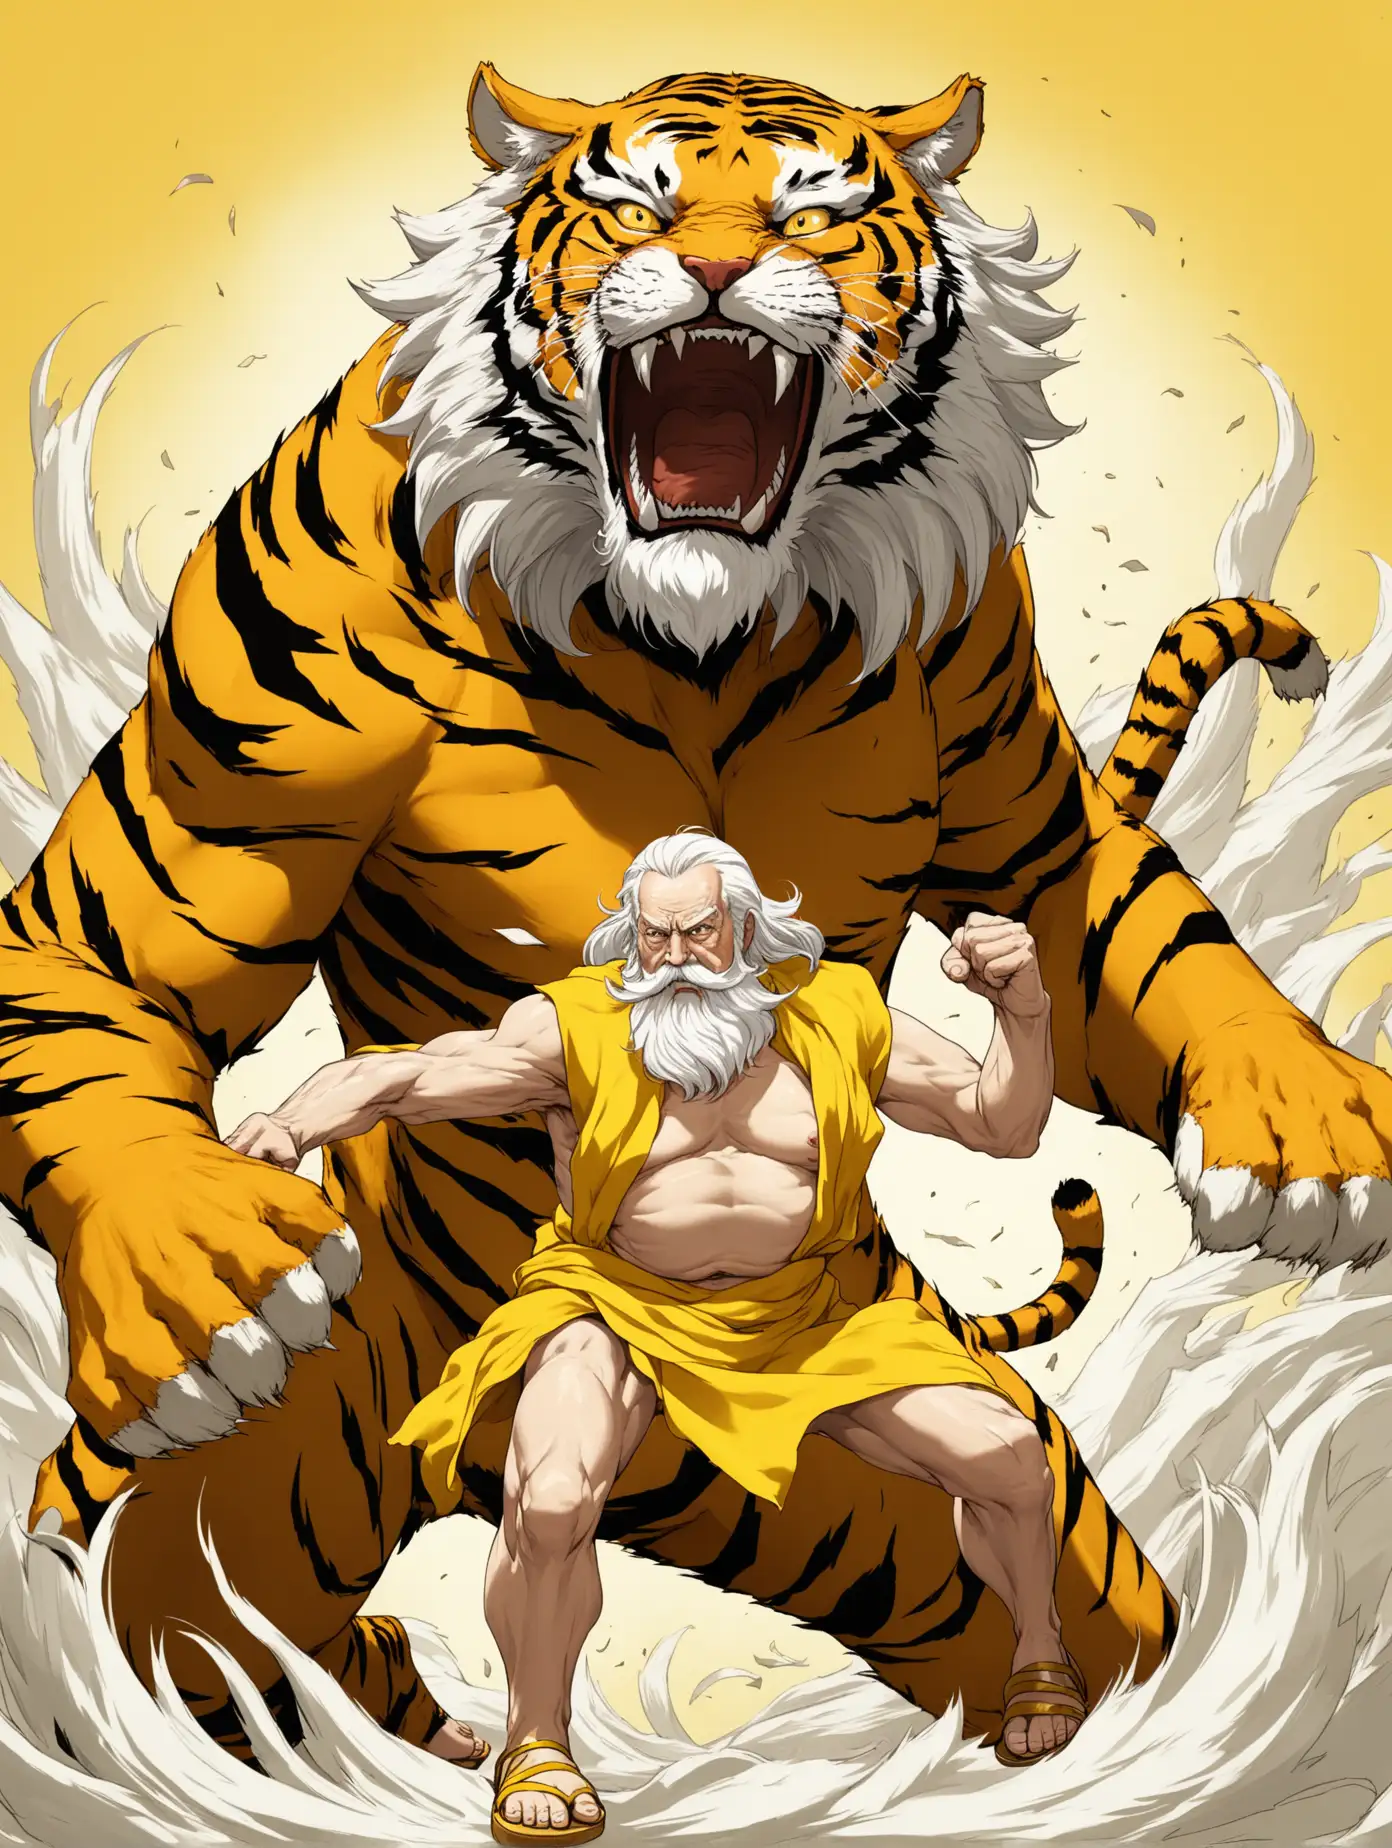 Elderly-Warrior-Confronts-Giant-Tiger-in-Yellow-Landscape